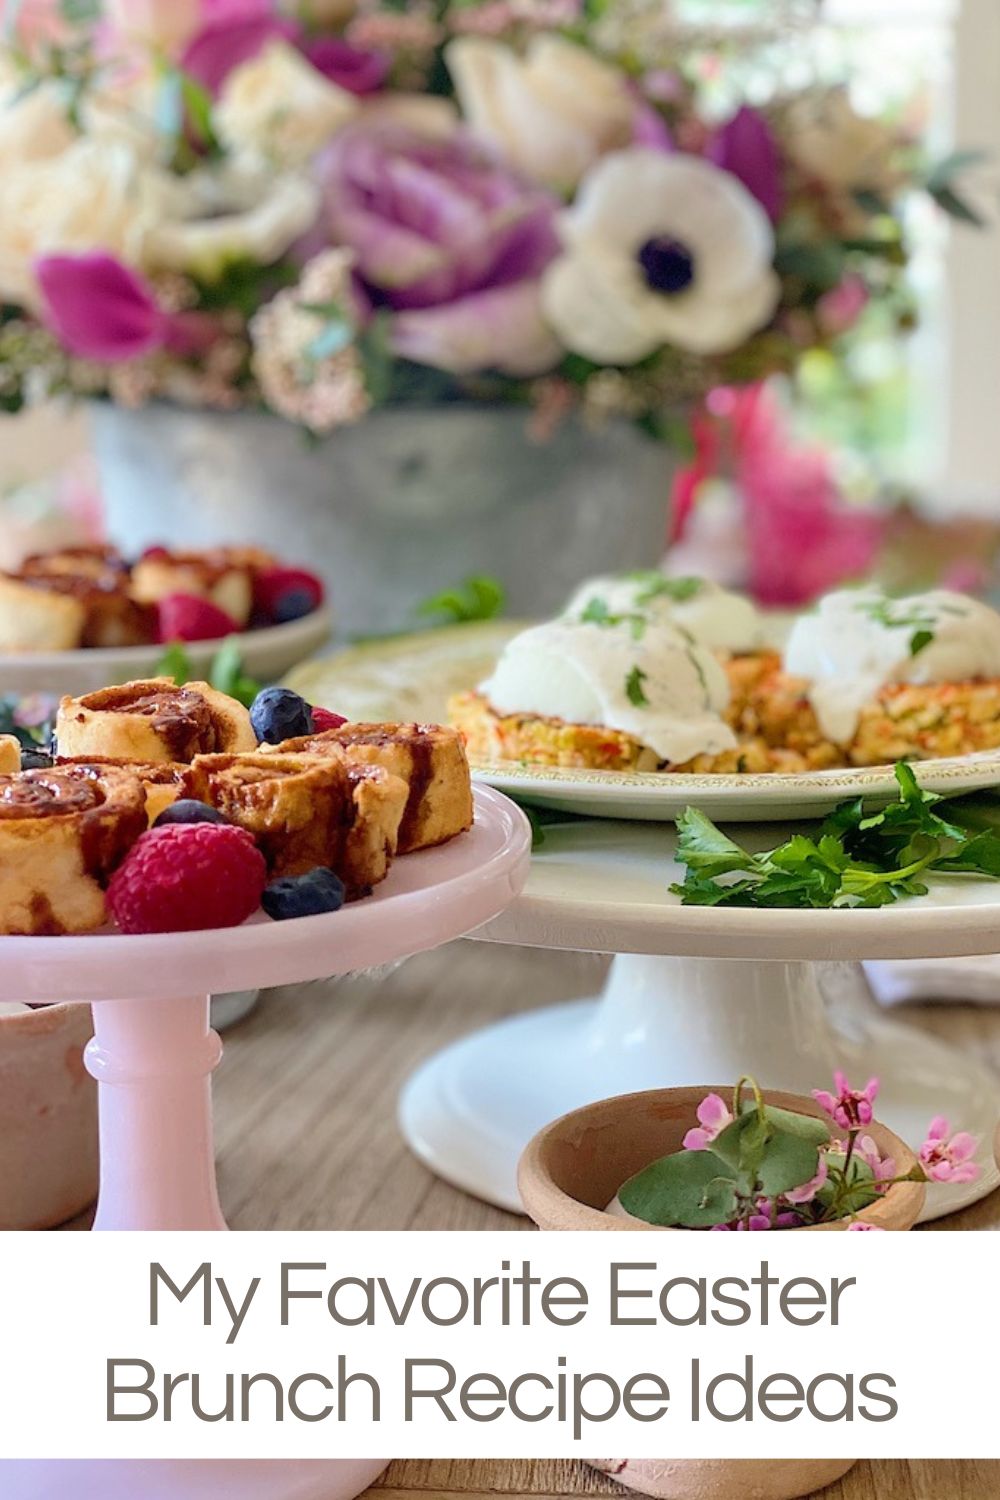 Today I am sharing some of my favorite Easter Brunch Recipe ideas. These recipes are amazing and everyone in our family loved everything!